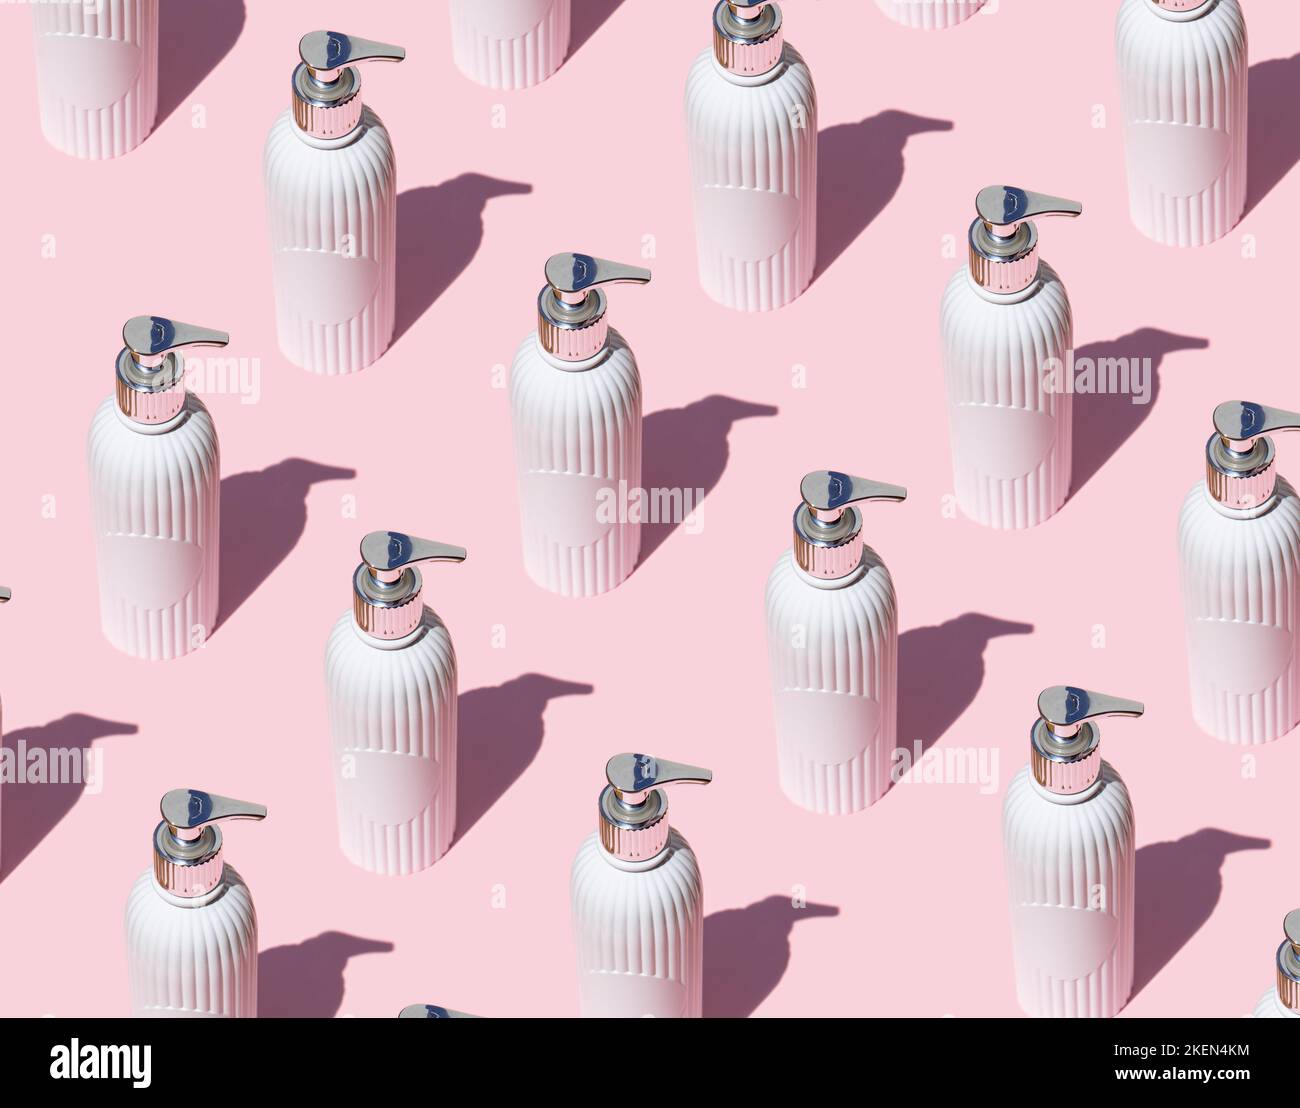 Cosmetic sprayer pattern on pink background Stock Photo